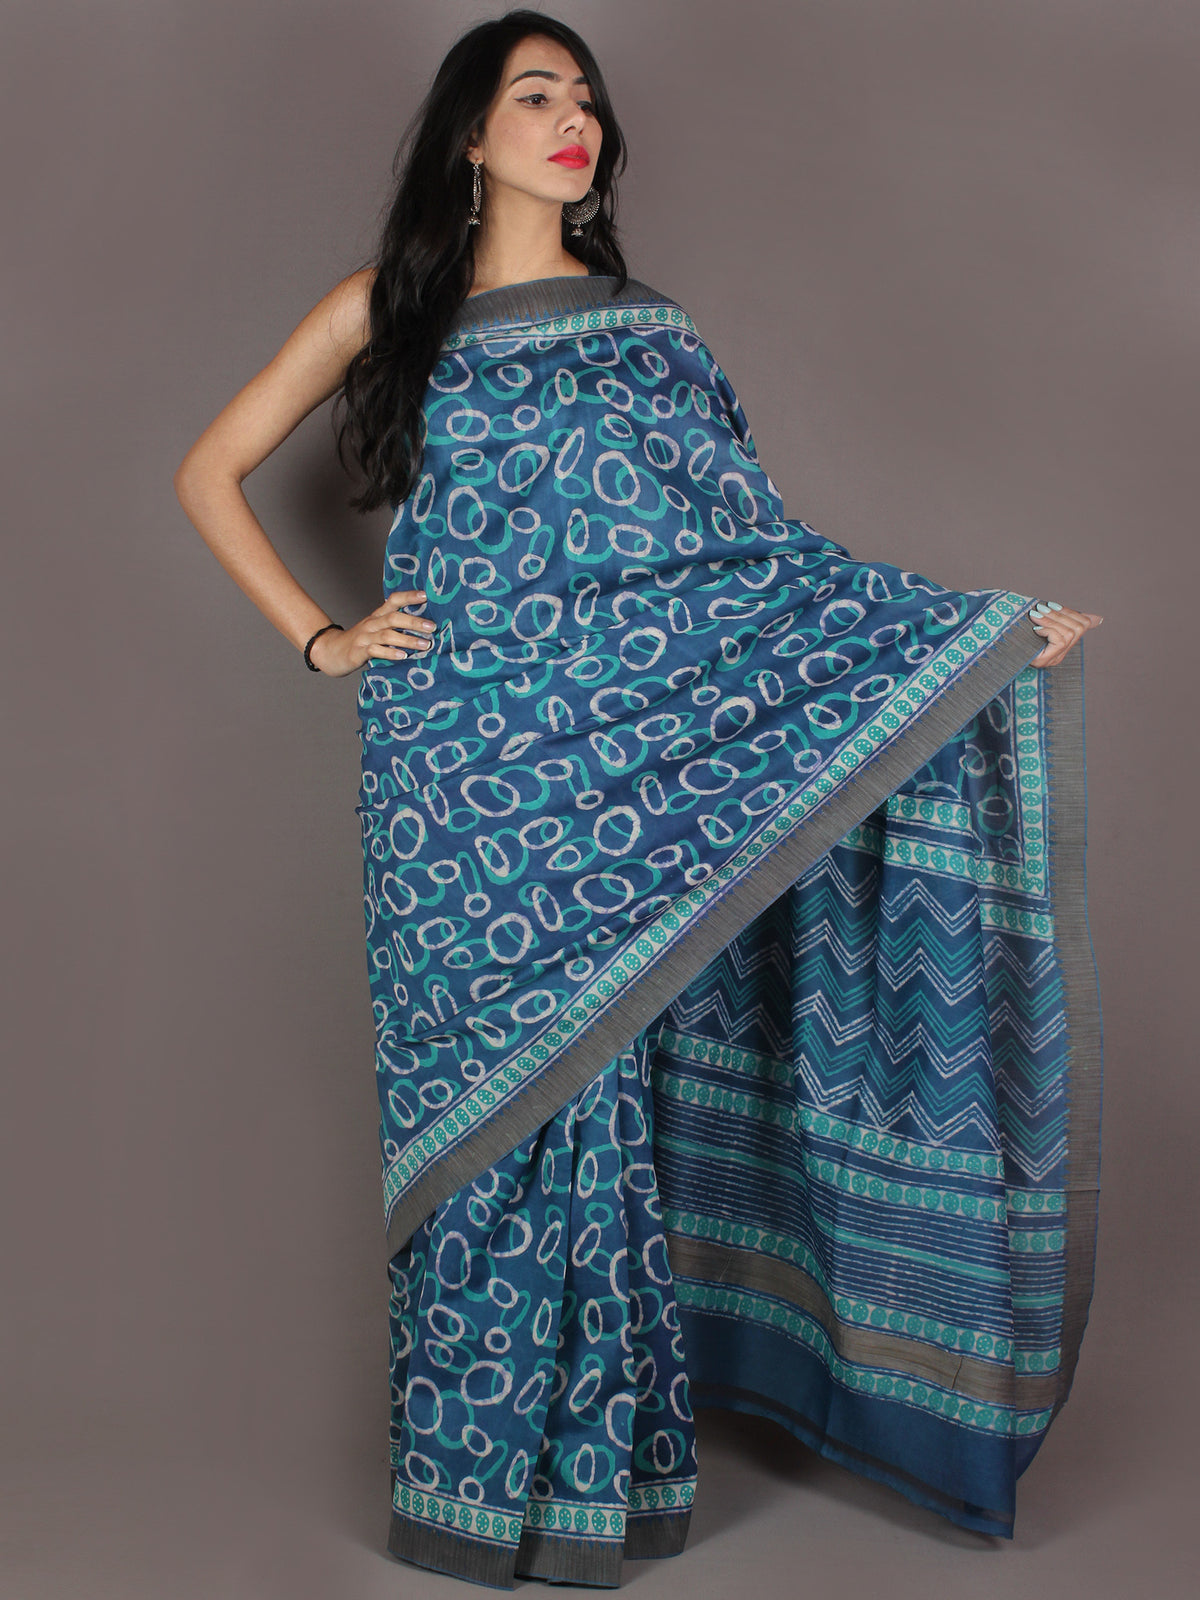 Teal Blue White Hand Block Printed in Natural Colors Chanderi Saree With Geecha Border - S031701003